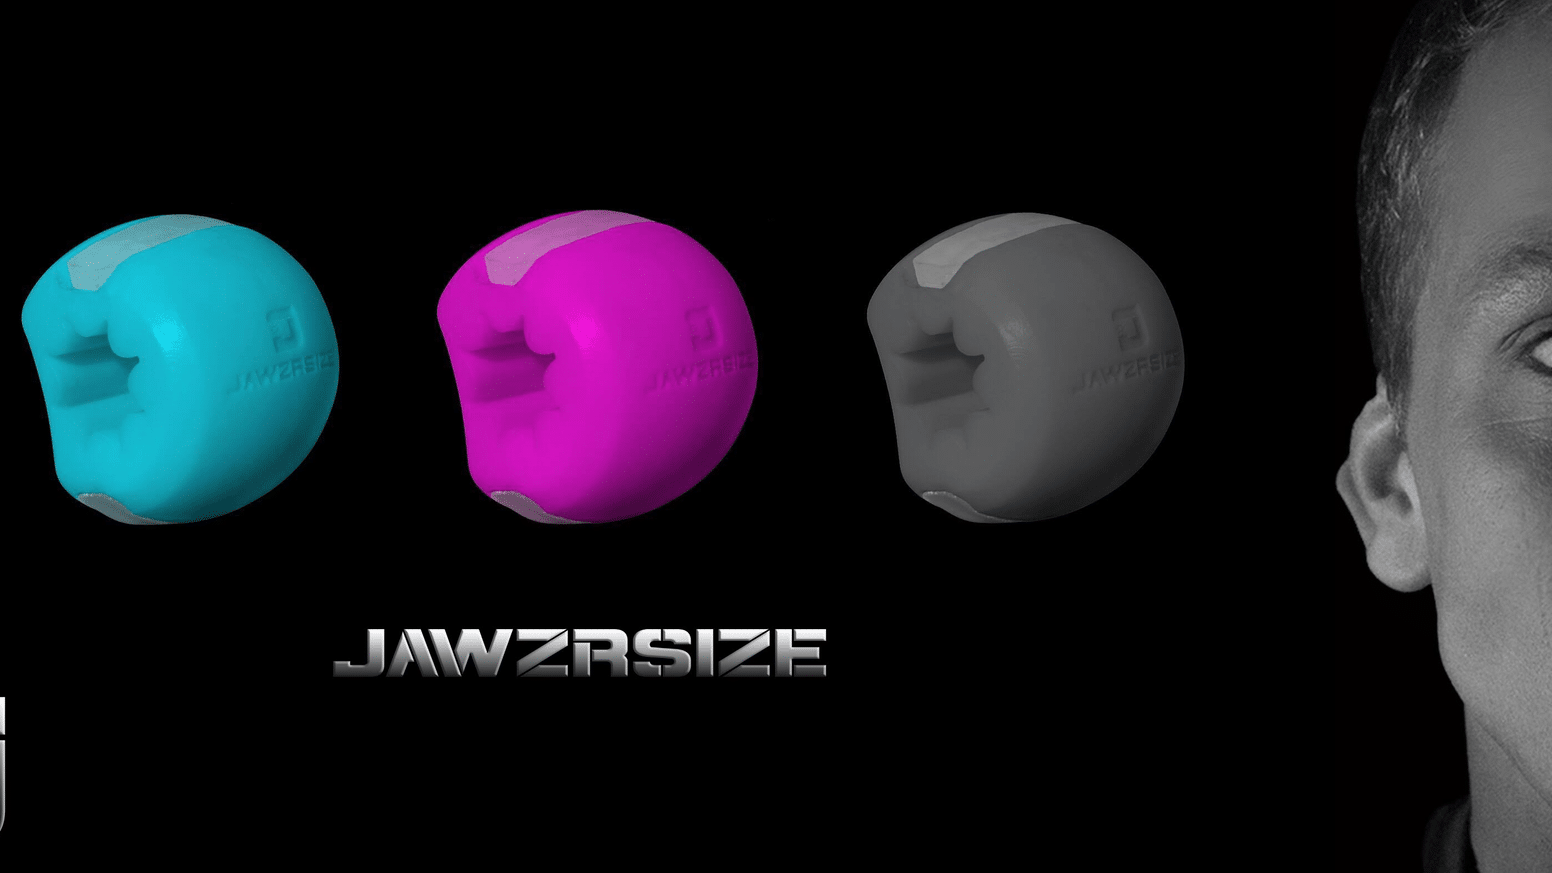 Why You Shouldn't Use Jawzrsize, According to Experts